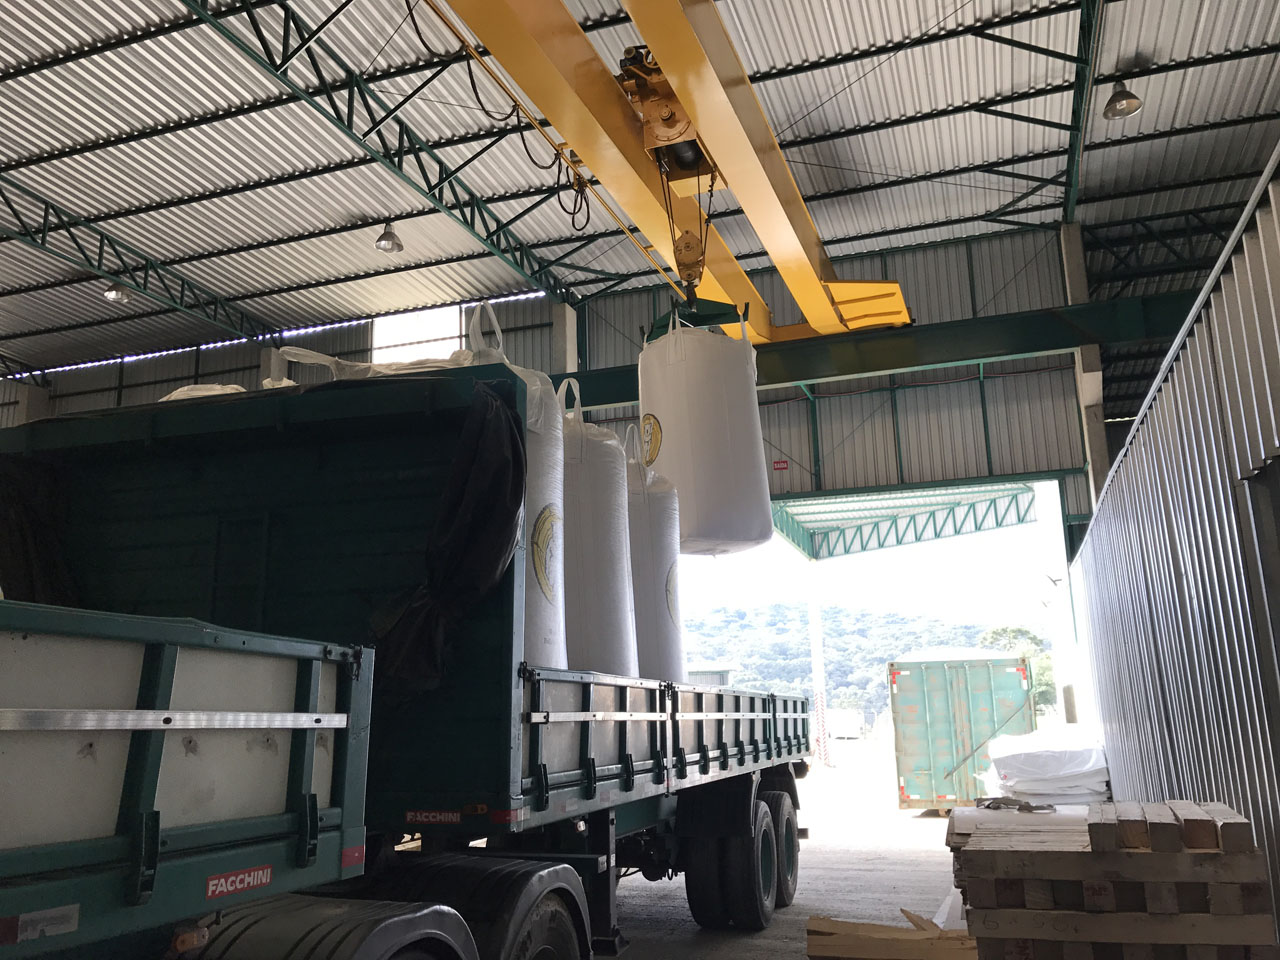 Overhead crane loading the truck with white batches of cargo